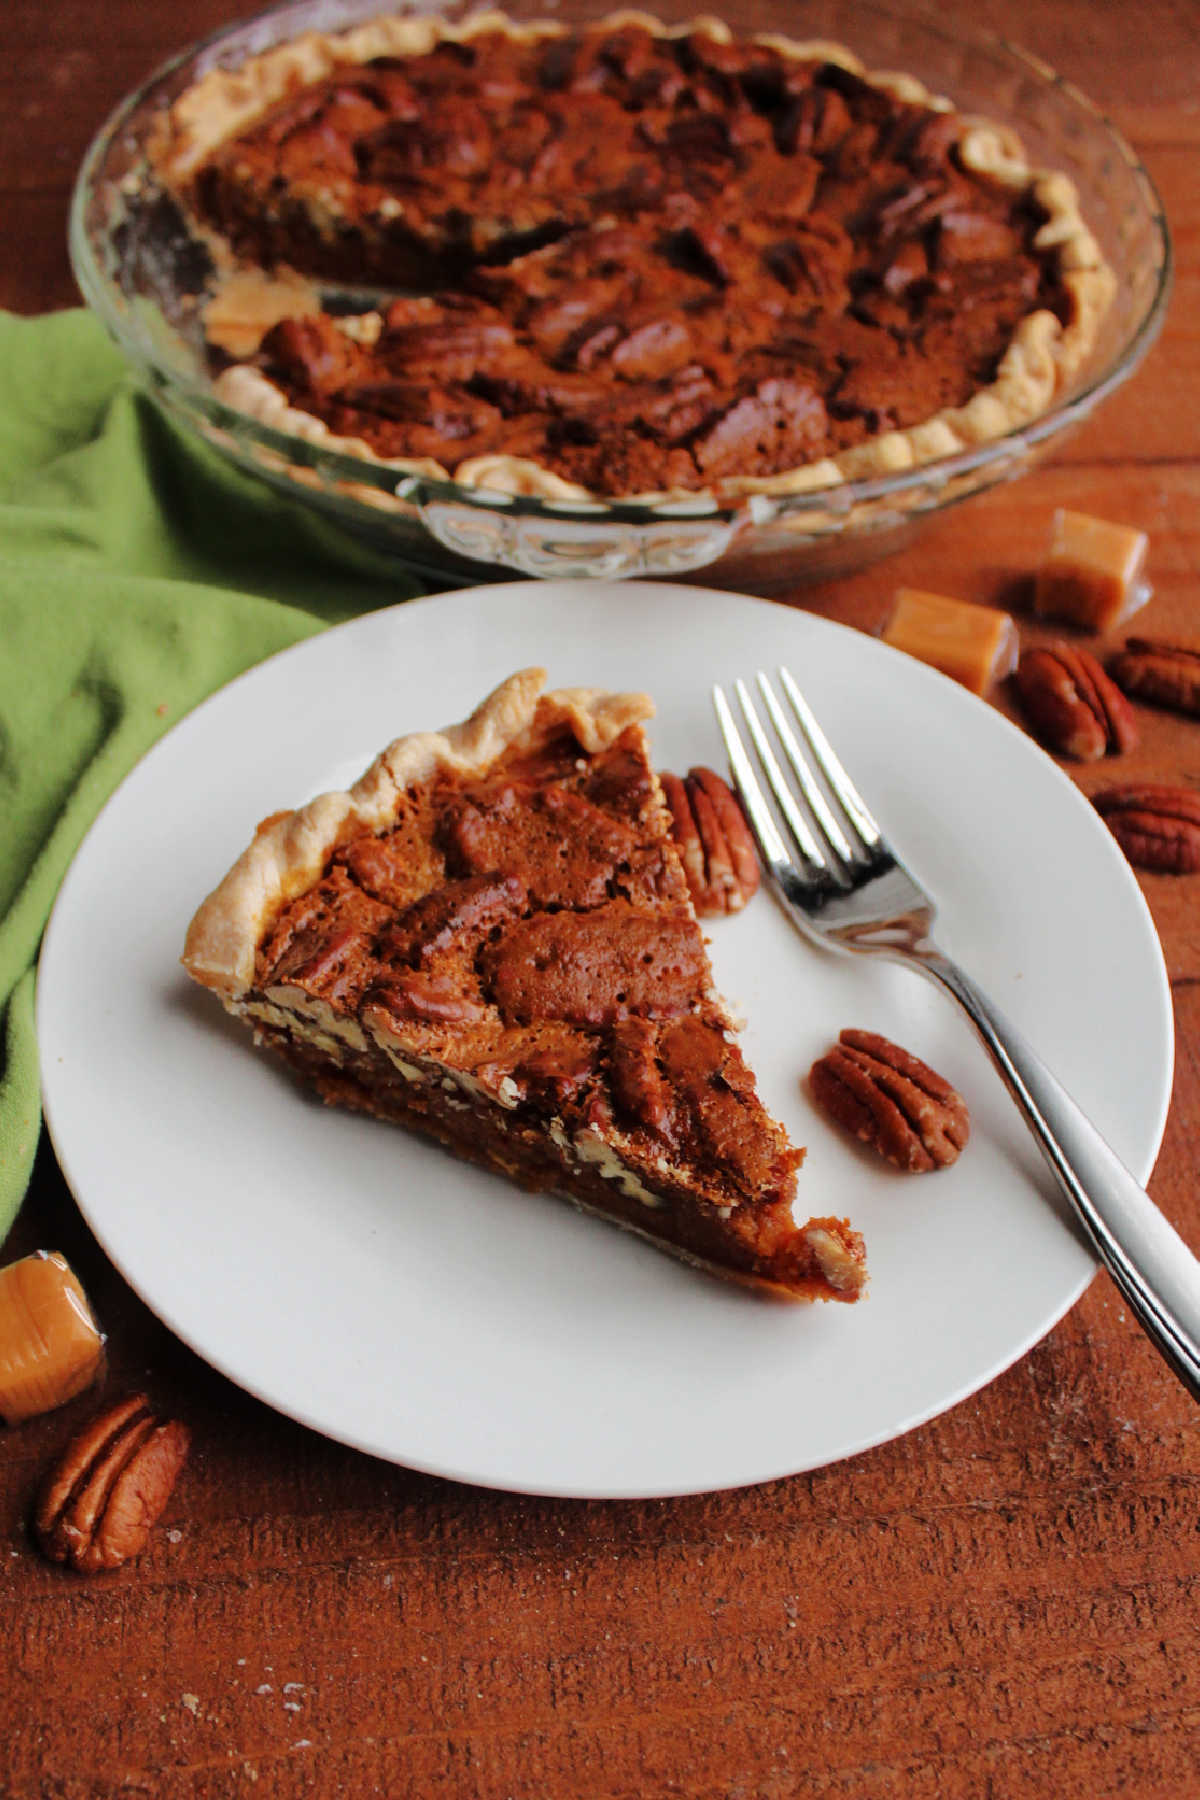 Slice of caramel pecan pie served with remaining pie in the background.